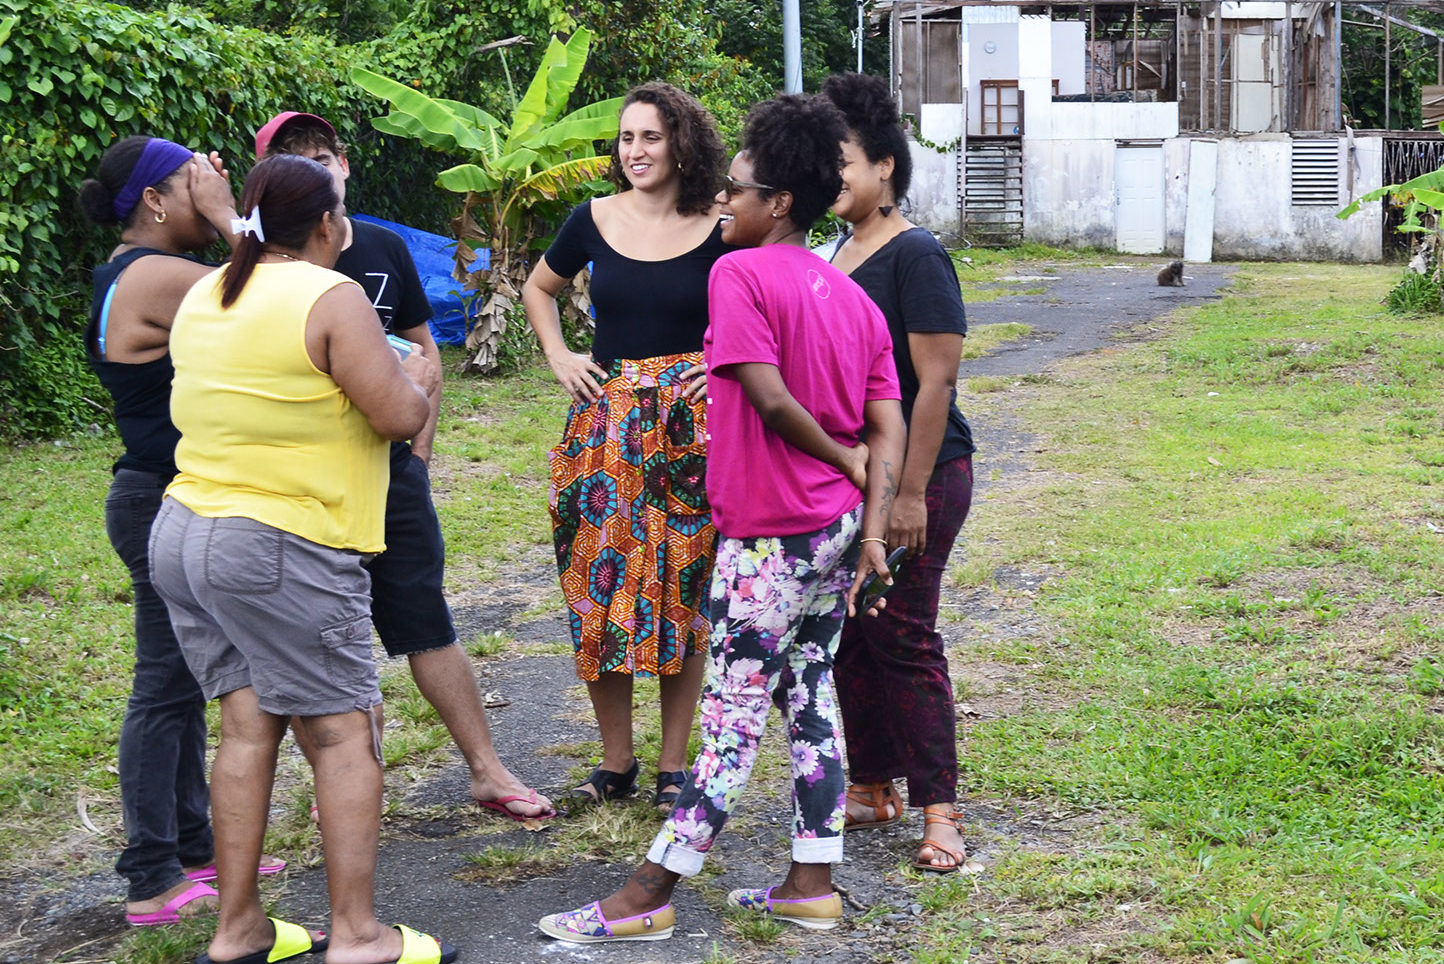 Co-Founder of La Maraña, Sofía Unanue Banuchi having initial conversations with community members after Hurricane Maria to discuss recovery planning.